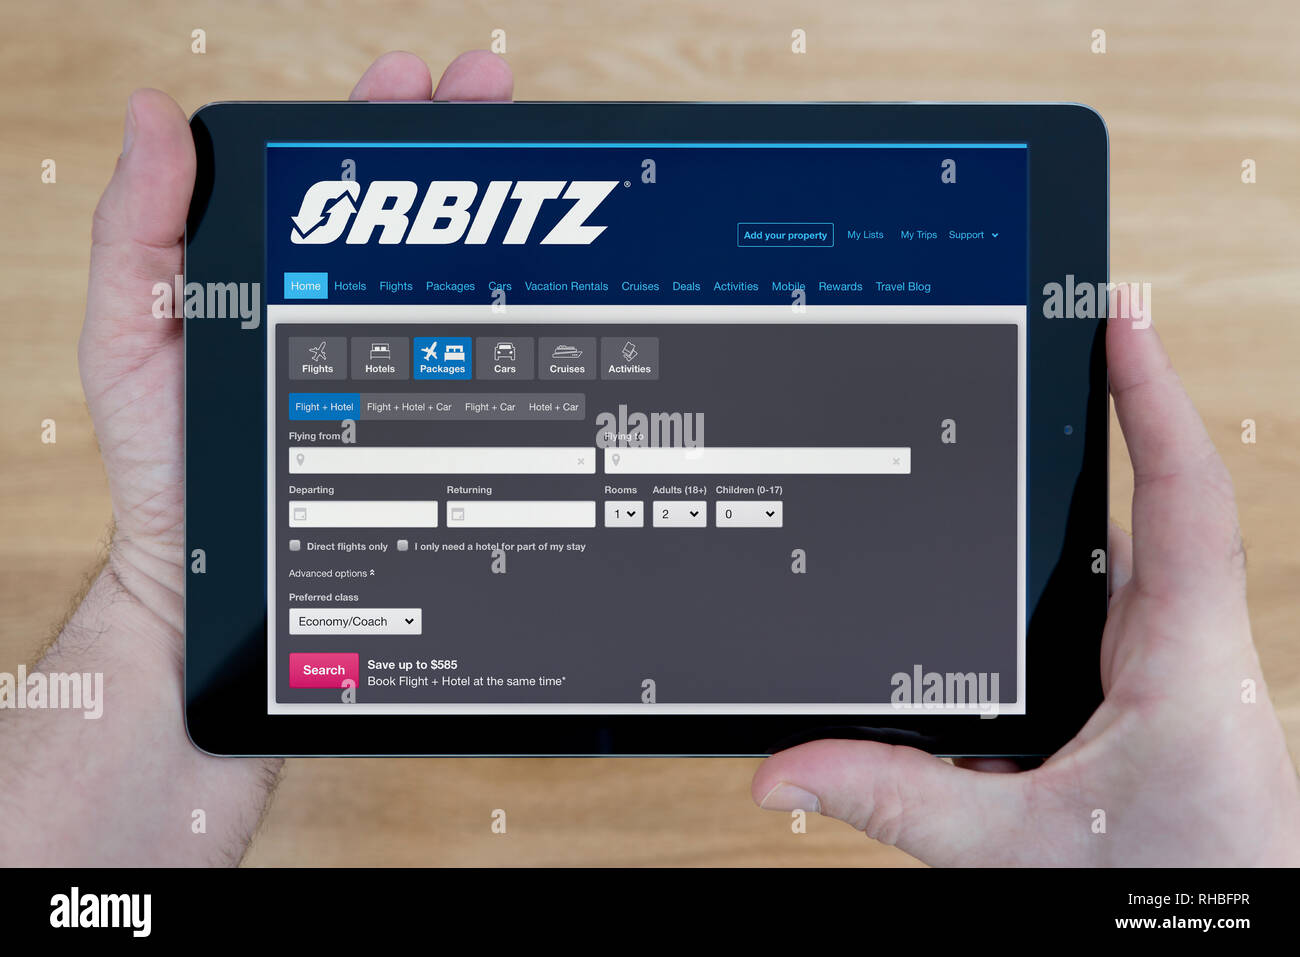 A man looks at the Orbitz website on his iPad tablet device, shot against a wooden table top background (Editorial use only). Stock Photo